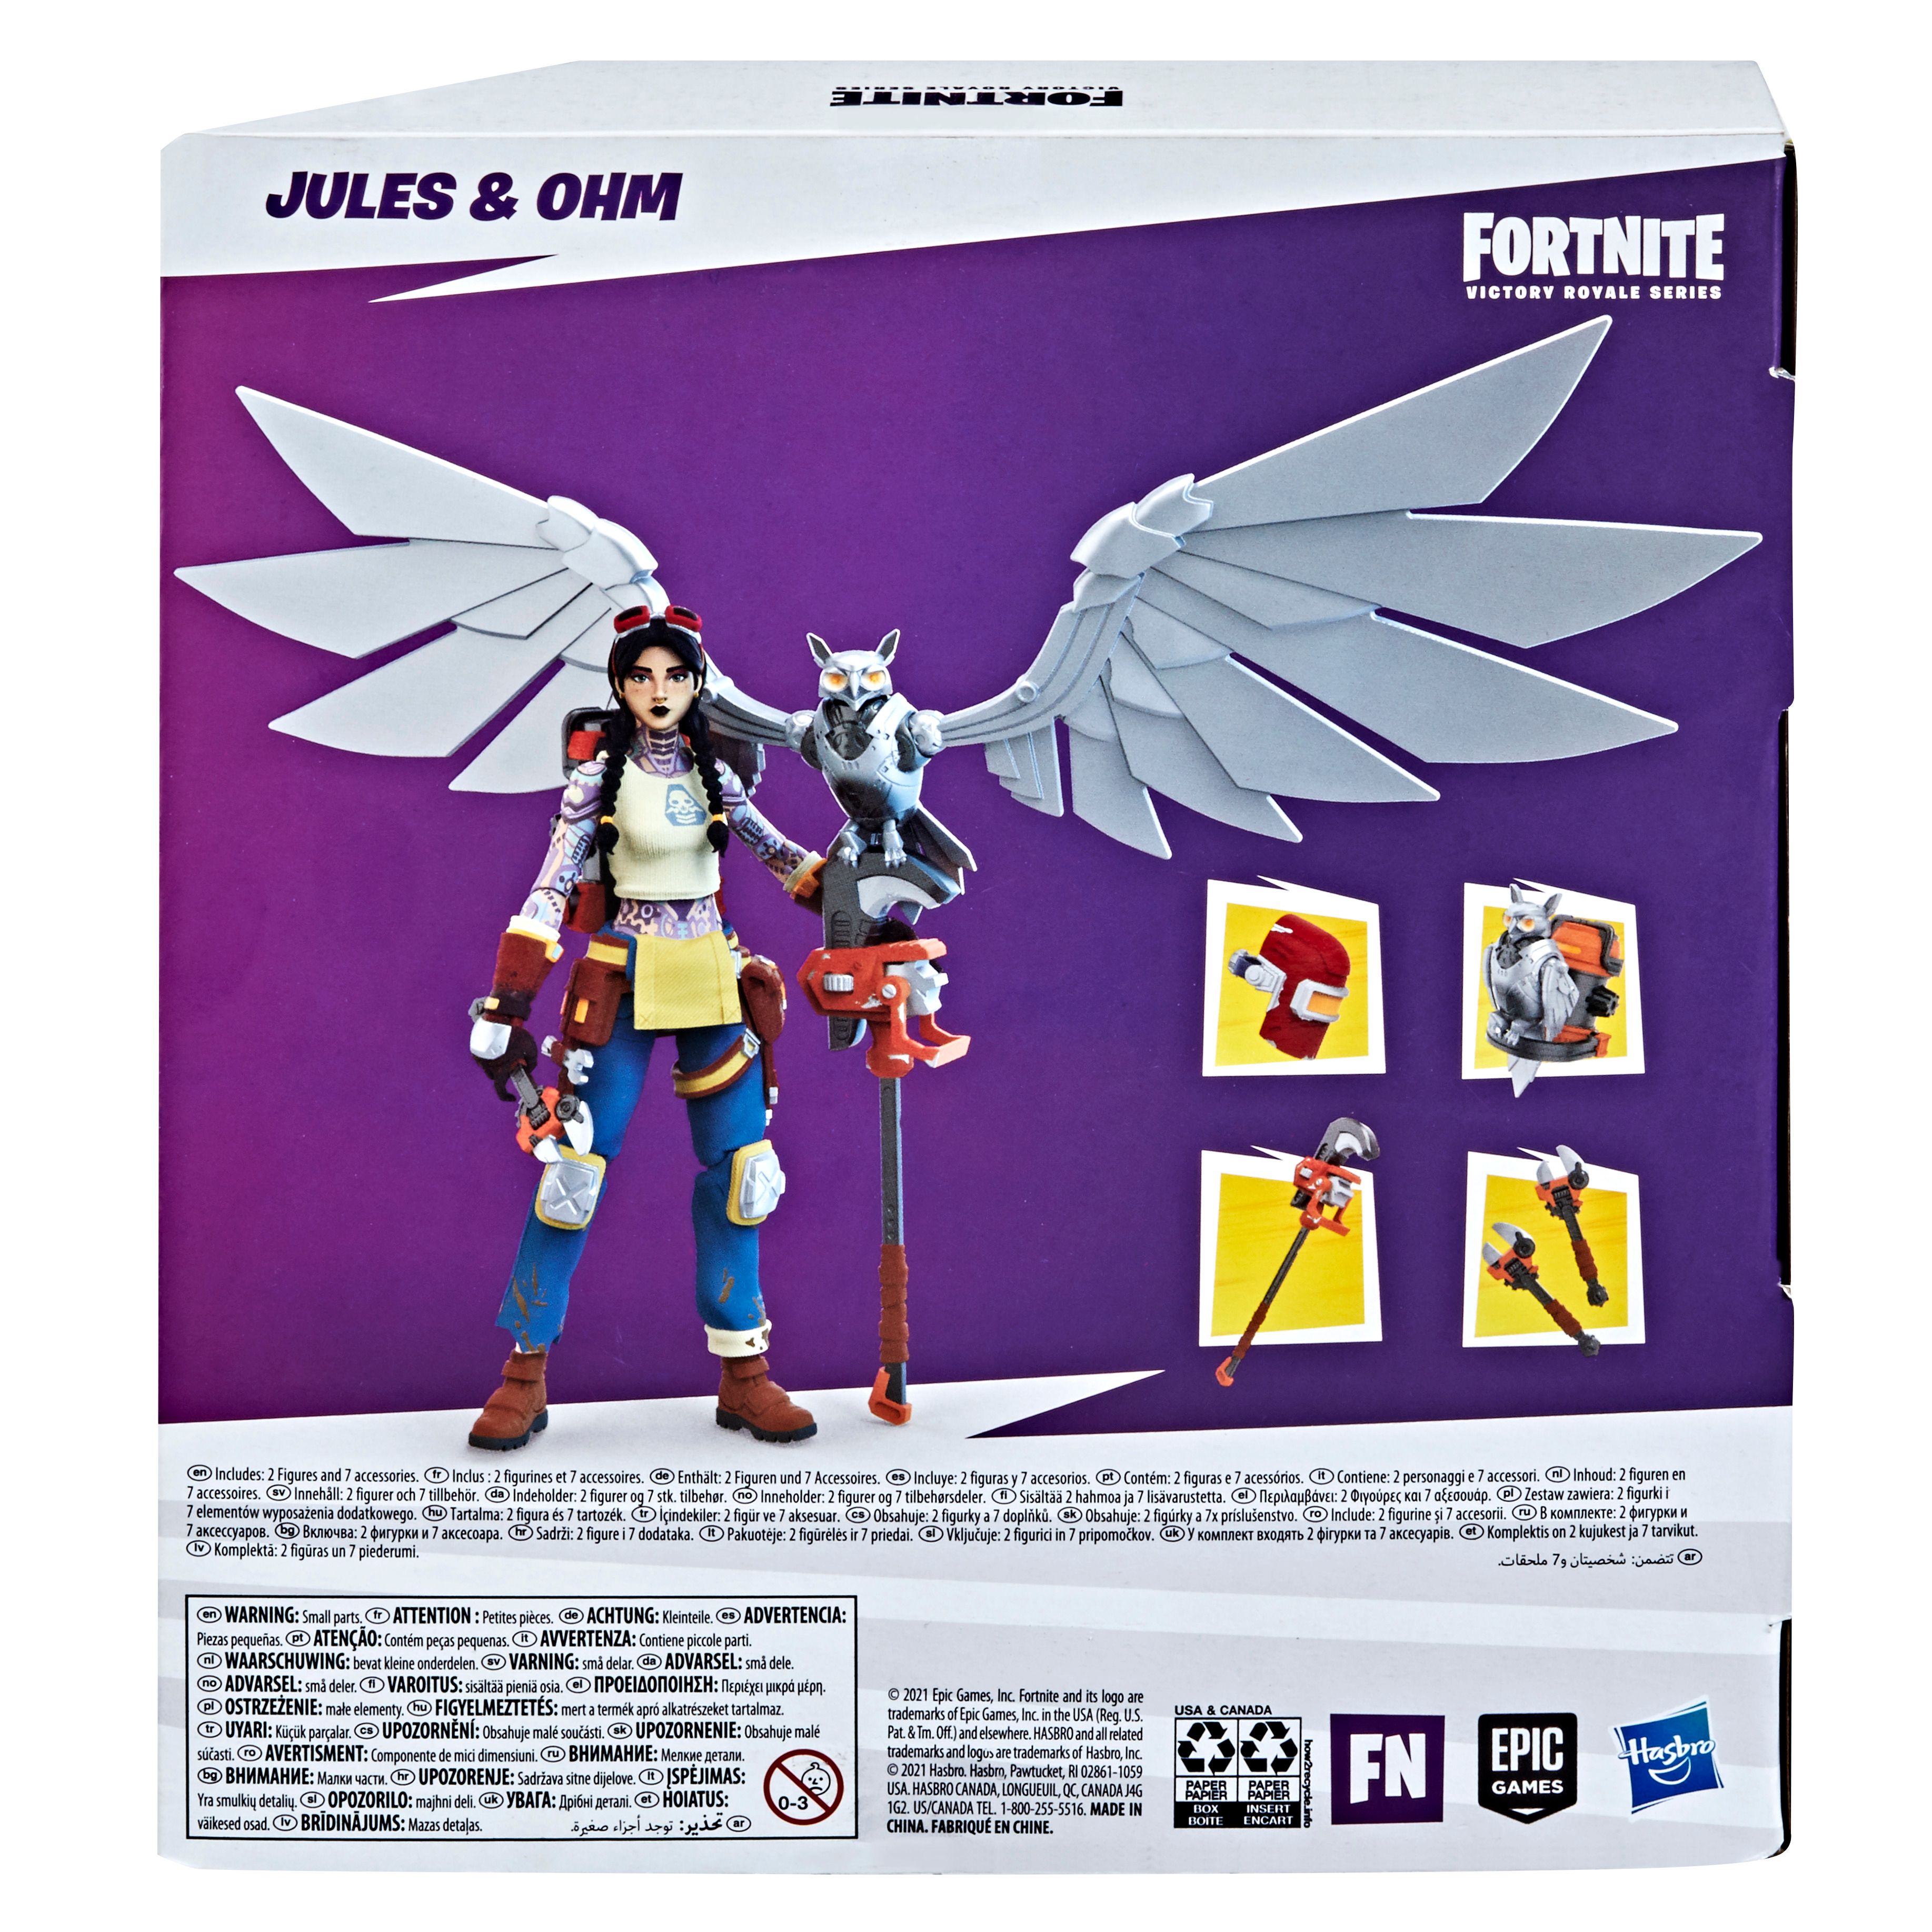 Hasbro Reveals New Jules & Ohm Fortnite Victory Royale Action Figures [EXCLUSIVE]